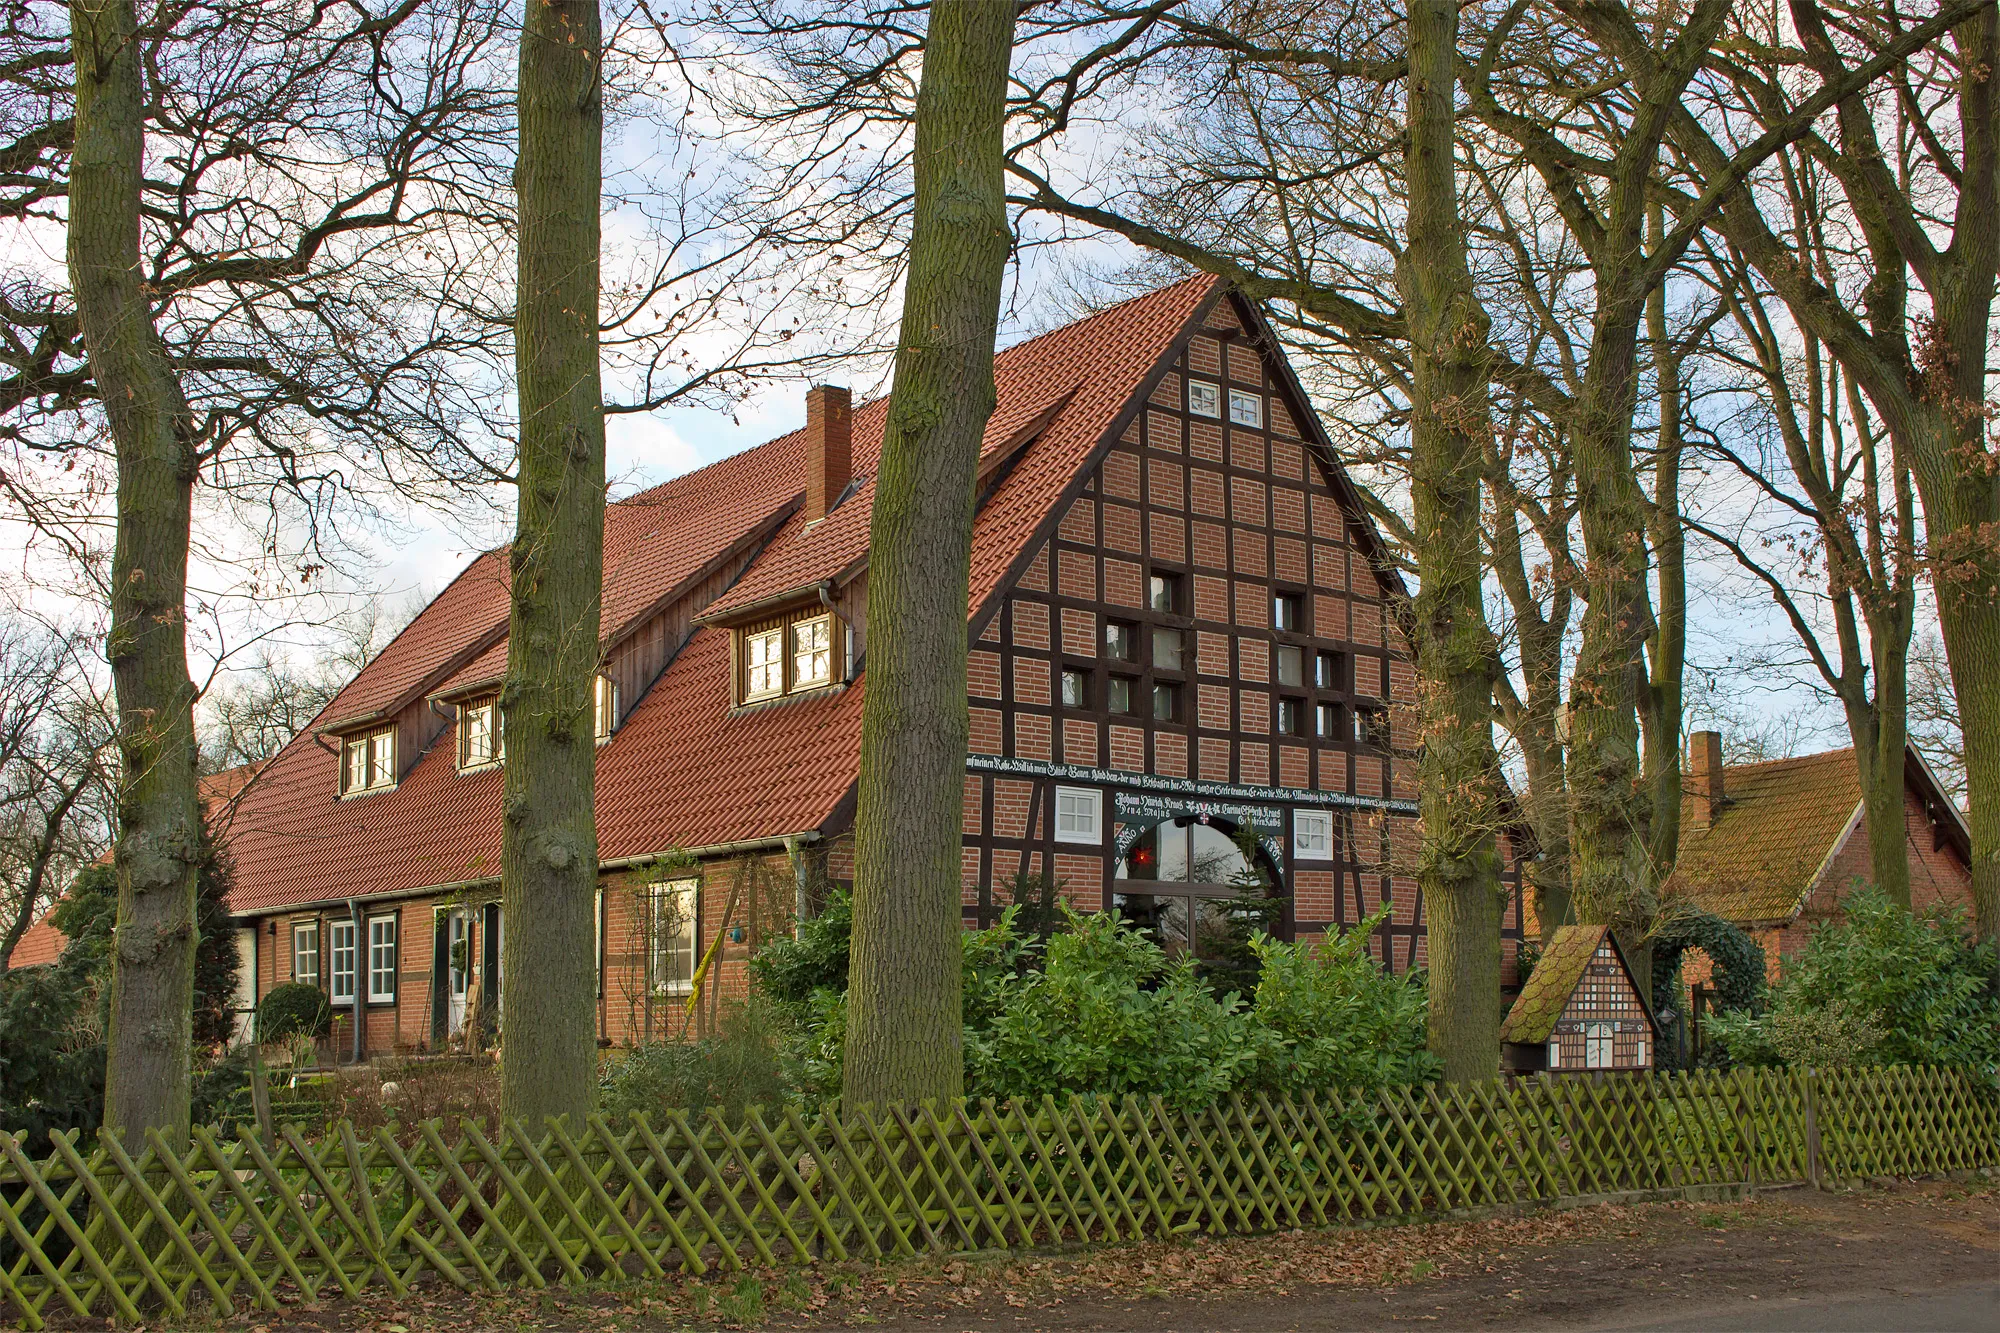 Photo showing: Cultural heritage monument "No 6" in the village Soven near Dannenberg (Elbe); built in 1801.